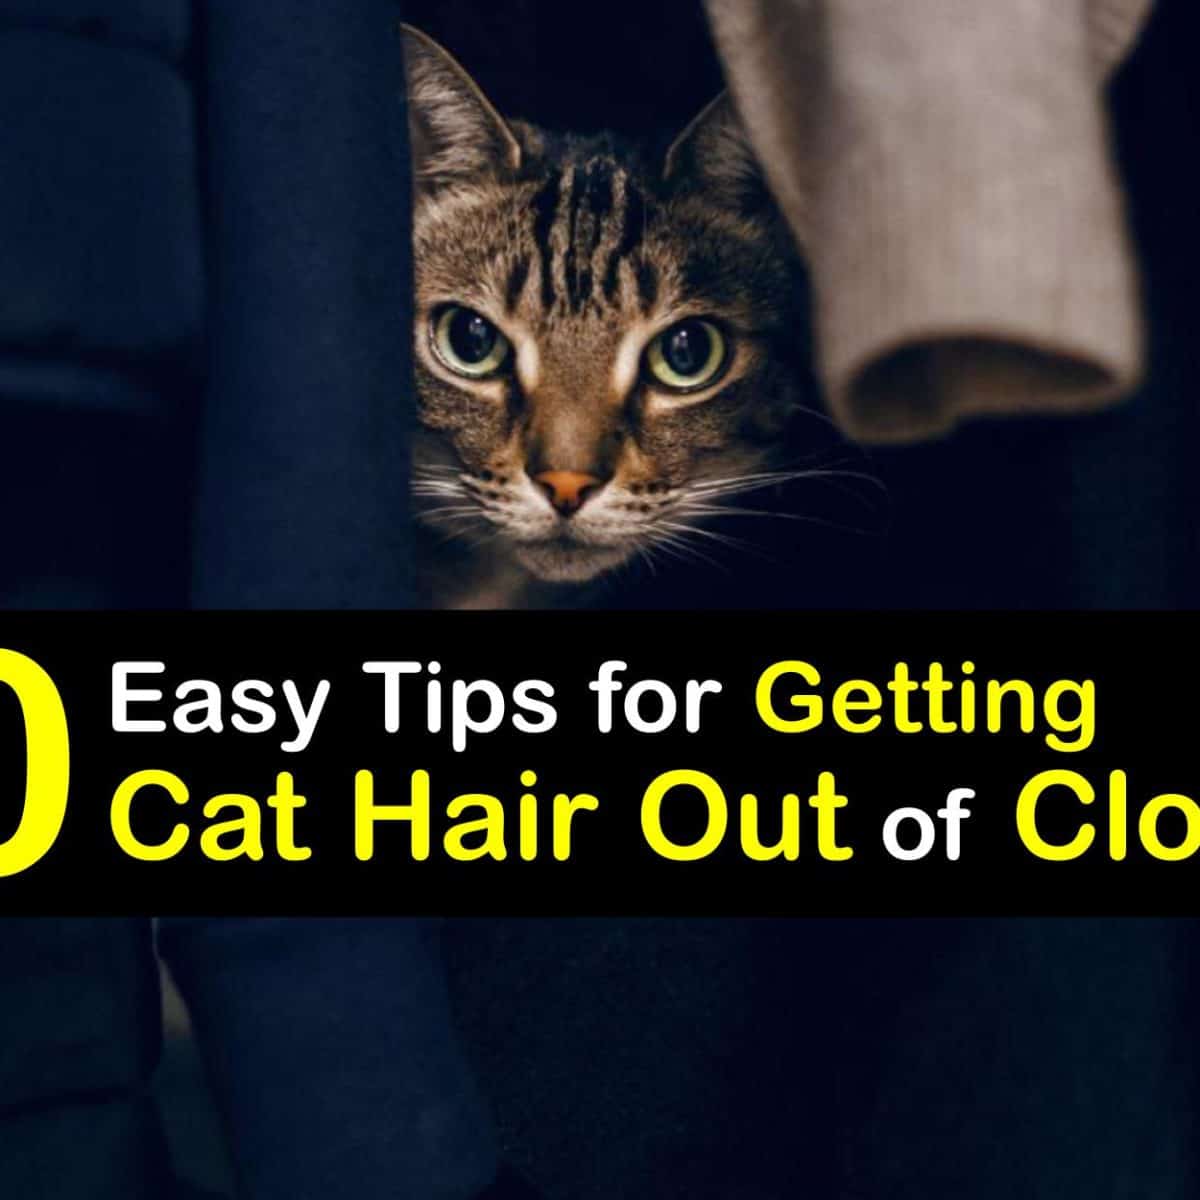 Get Rid of Cat Hair on Clothes - Guide to Removing Cat Fur from Clothing